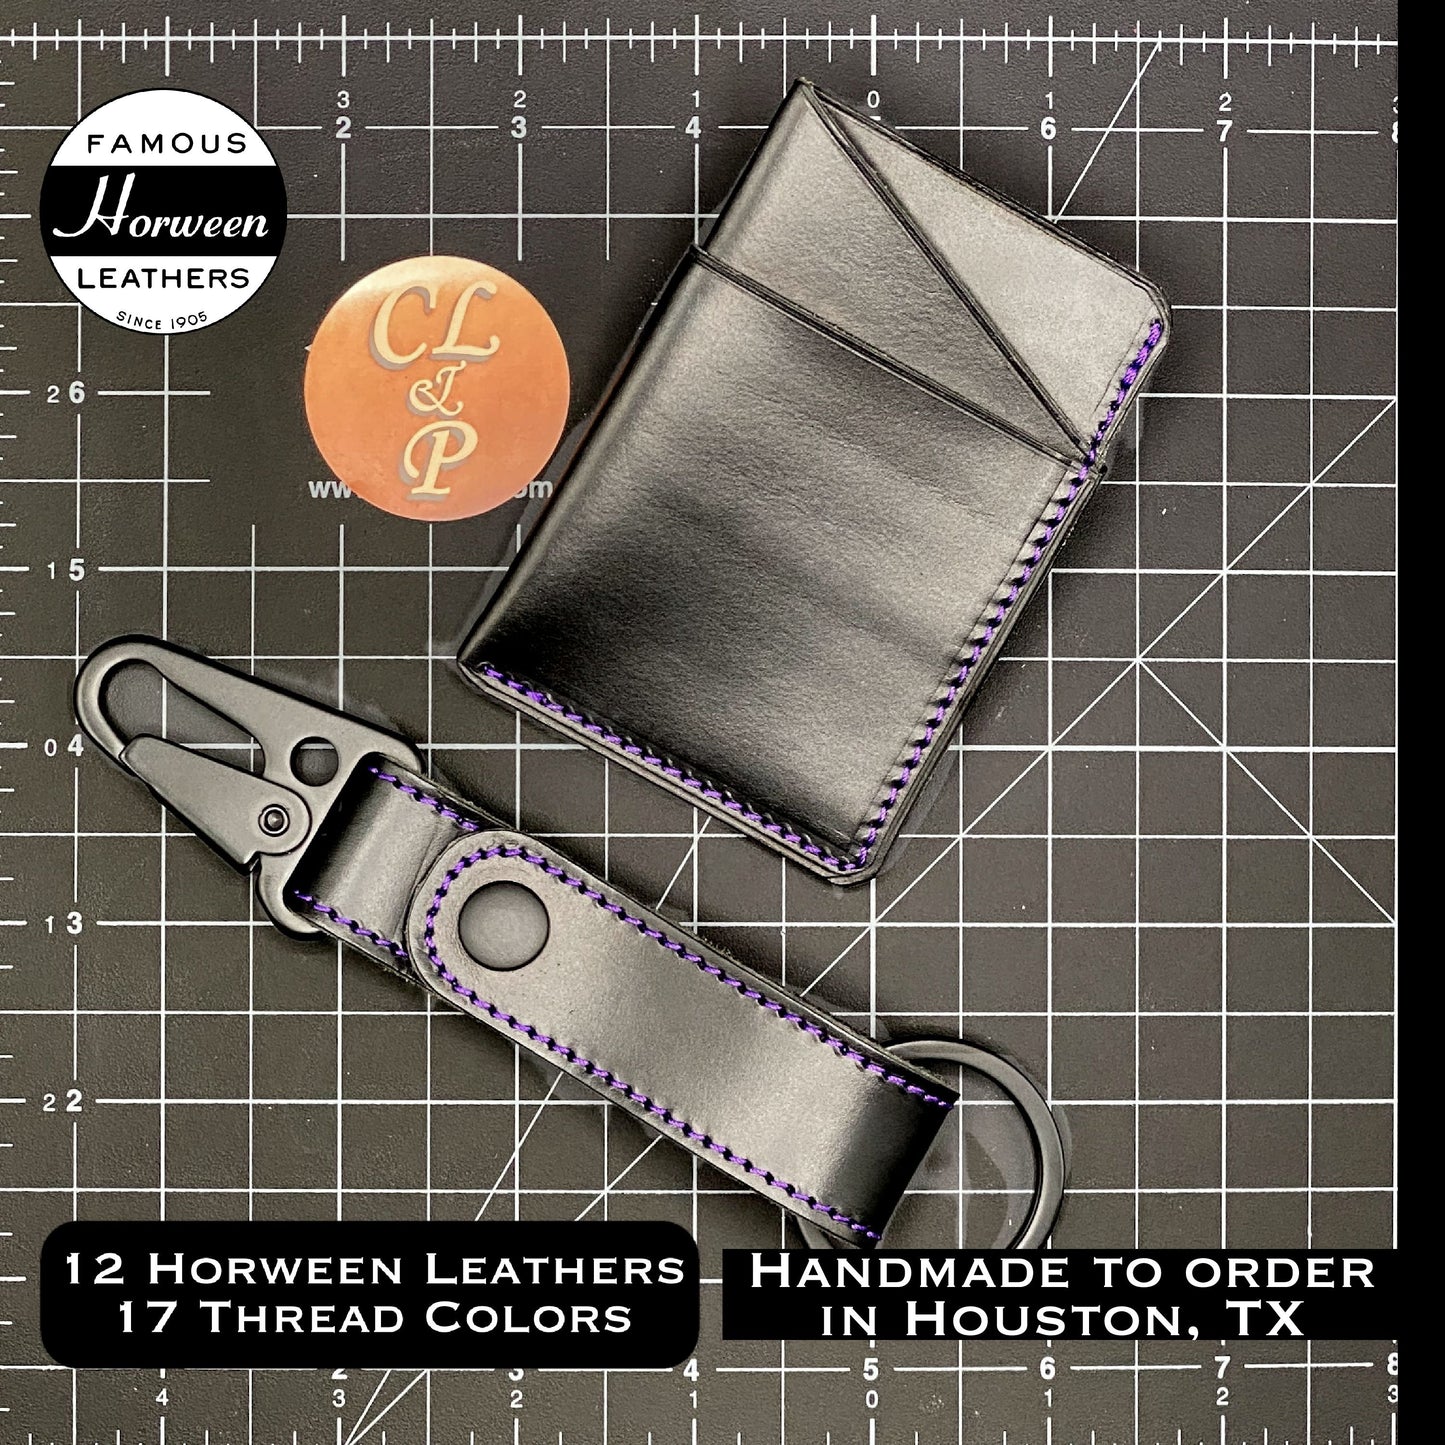 Custom EDC3 Minimalist Wallet in Black CXL Horween Leather with Purple Accent Stitching | Handmade Compact EDC Small Mini Wallet by Custom Leather and Pen in Houston, TX